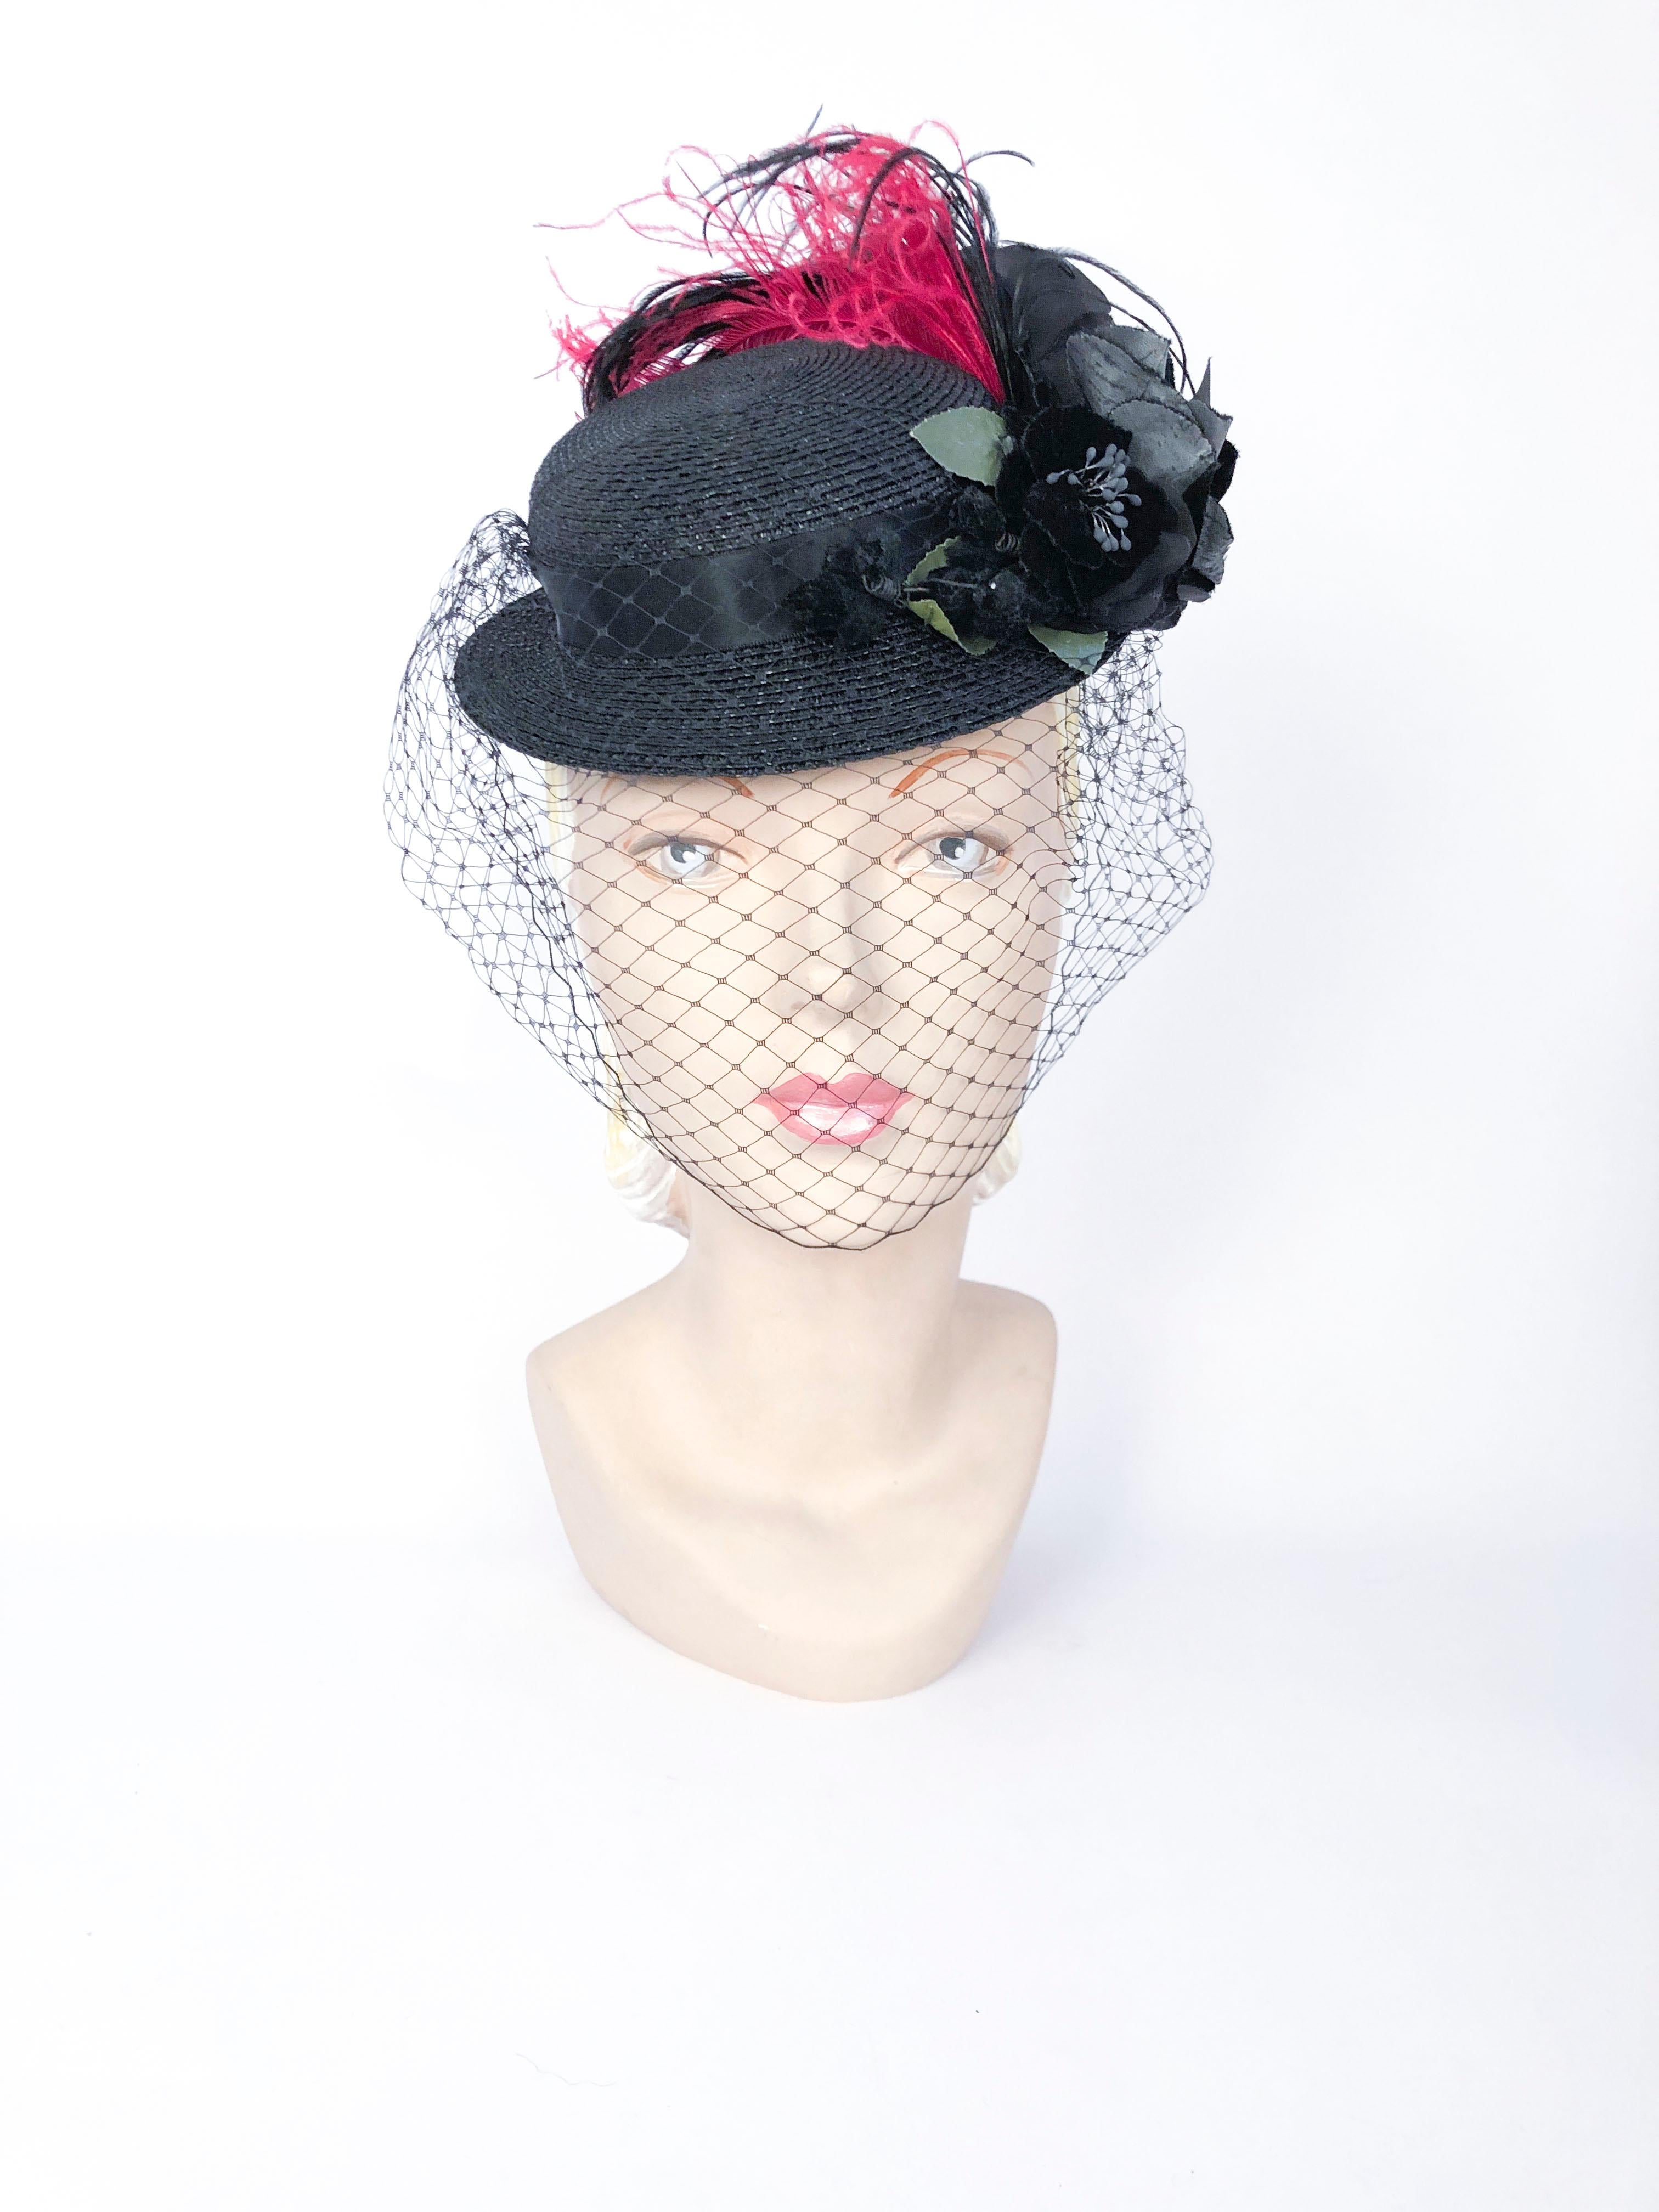 1940s Straw Toy Hat with Multi-colored Feathers (magenta and black), silk hand-cut flowers and Full Veil. Elastic is attached to further secure the hat to the head.